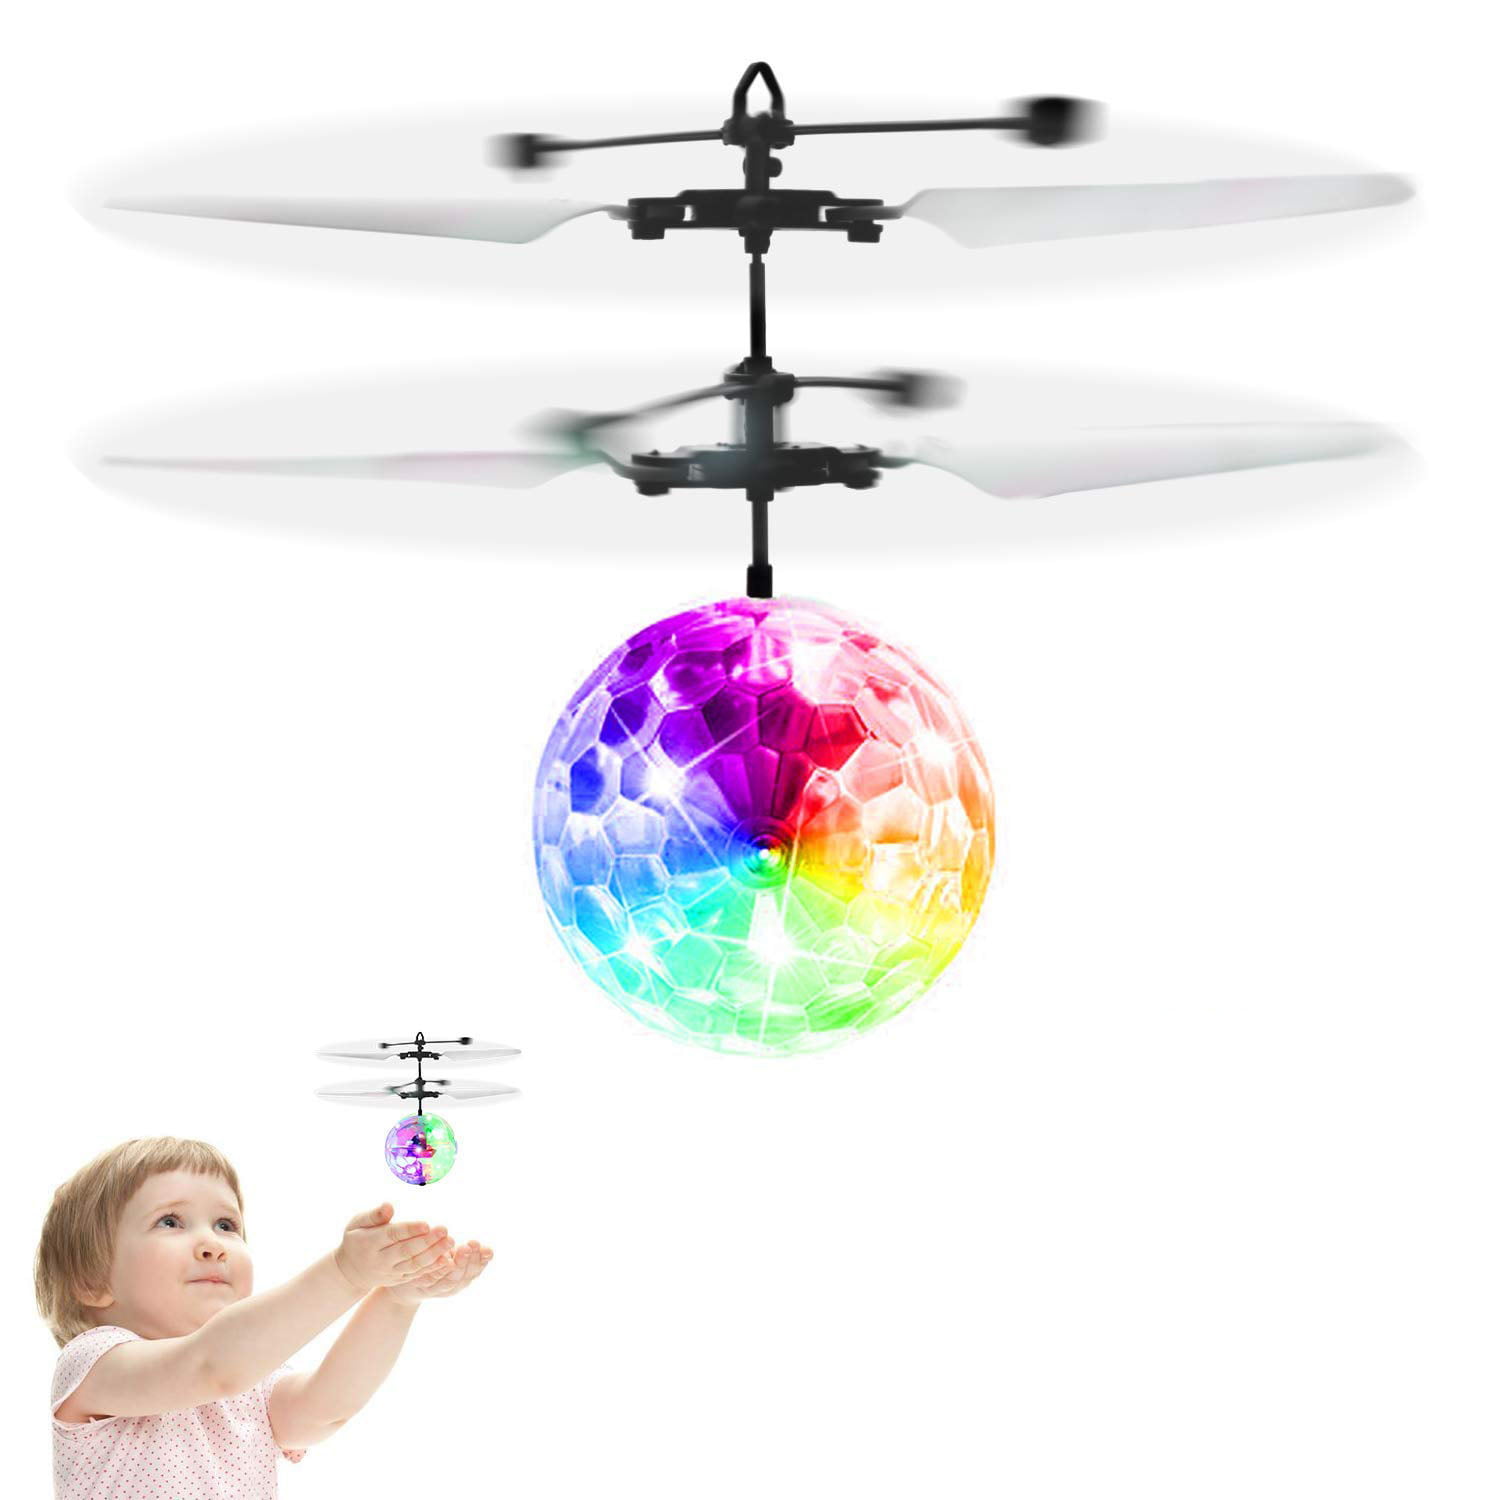 Mysterious Flying Ball Toys Infrared Induction RC Toy for Kids Built-in Rechargeable LED Light Up Disco Helicopter Shining Colorful Drone Indoor and Outdoor Games for Boys and Girls Toys 